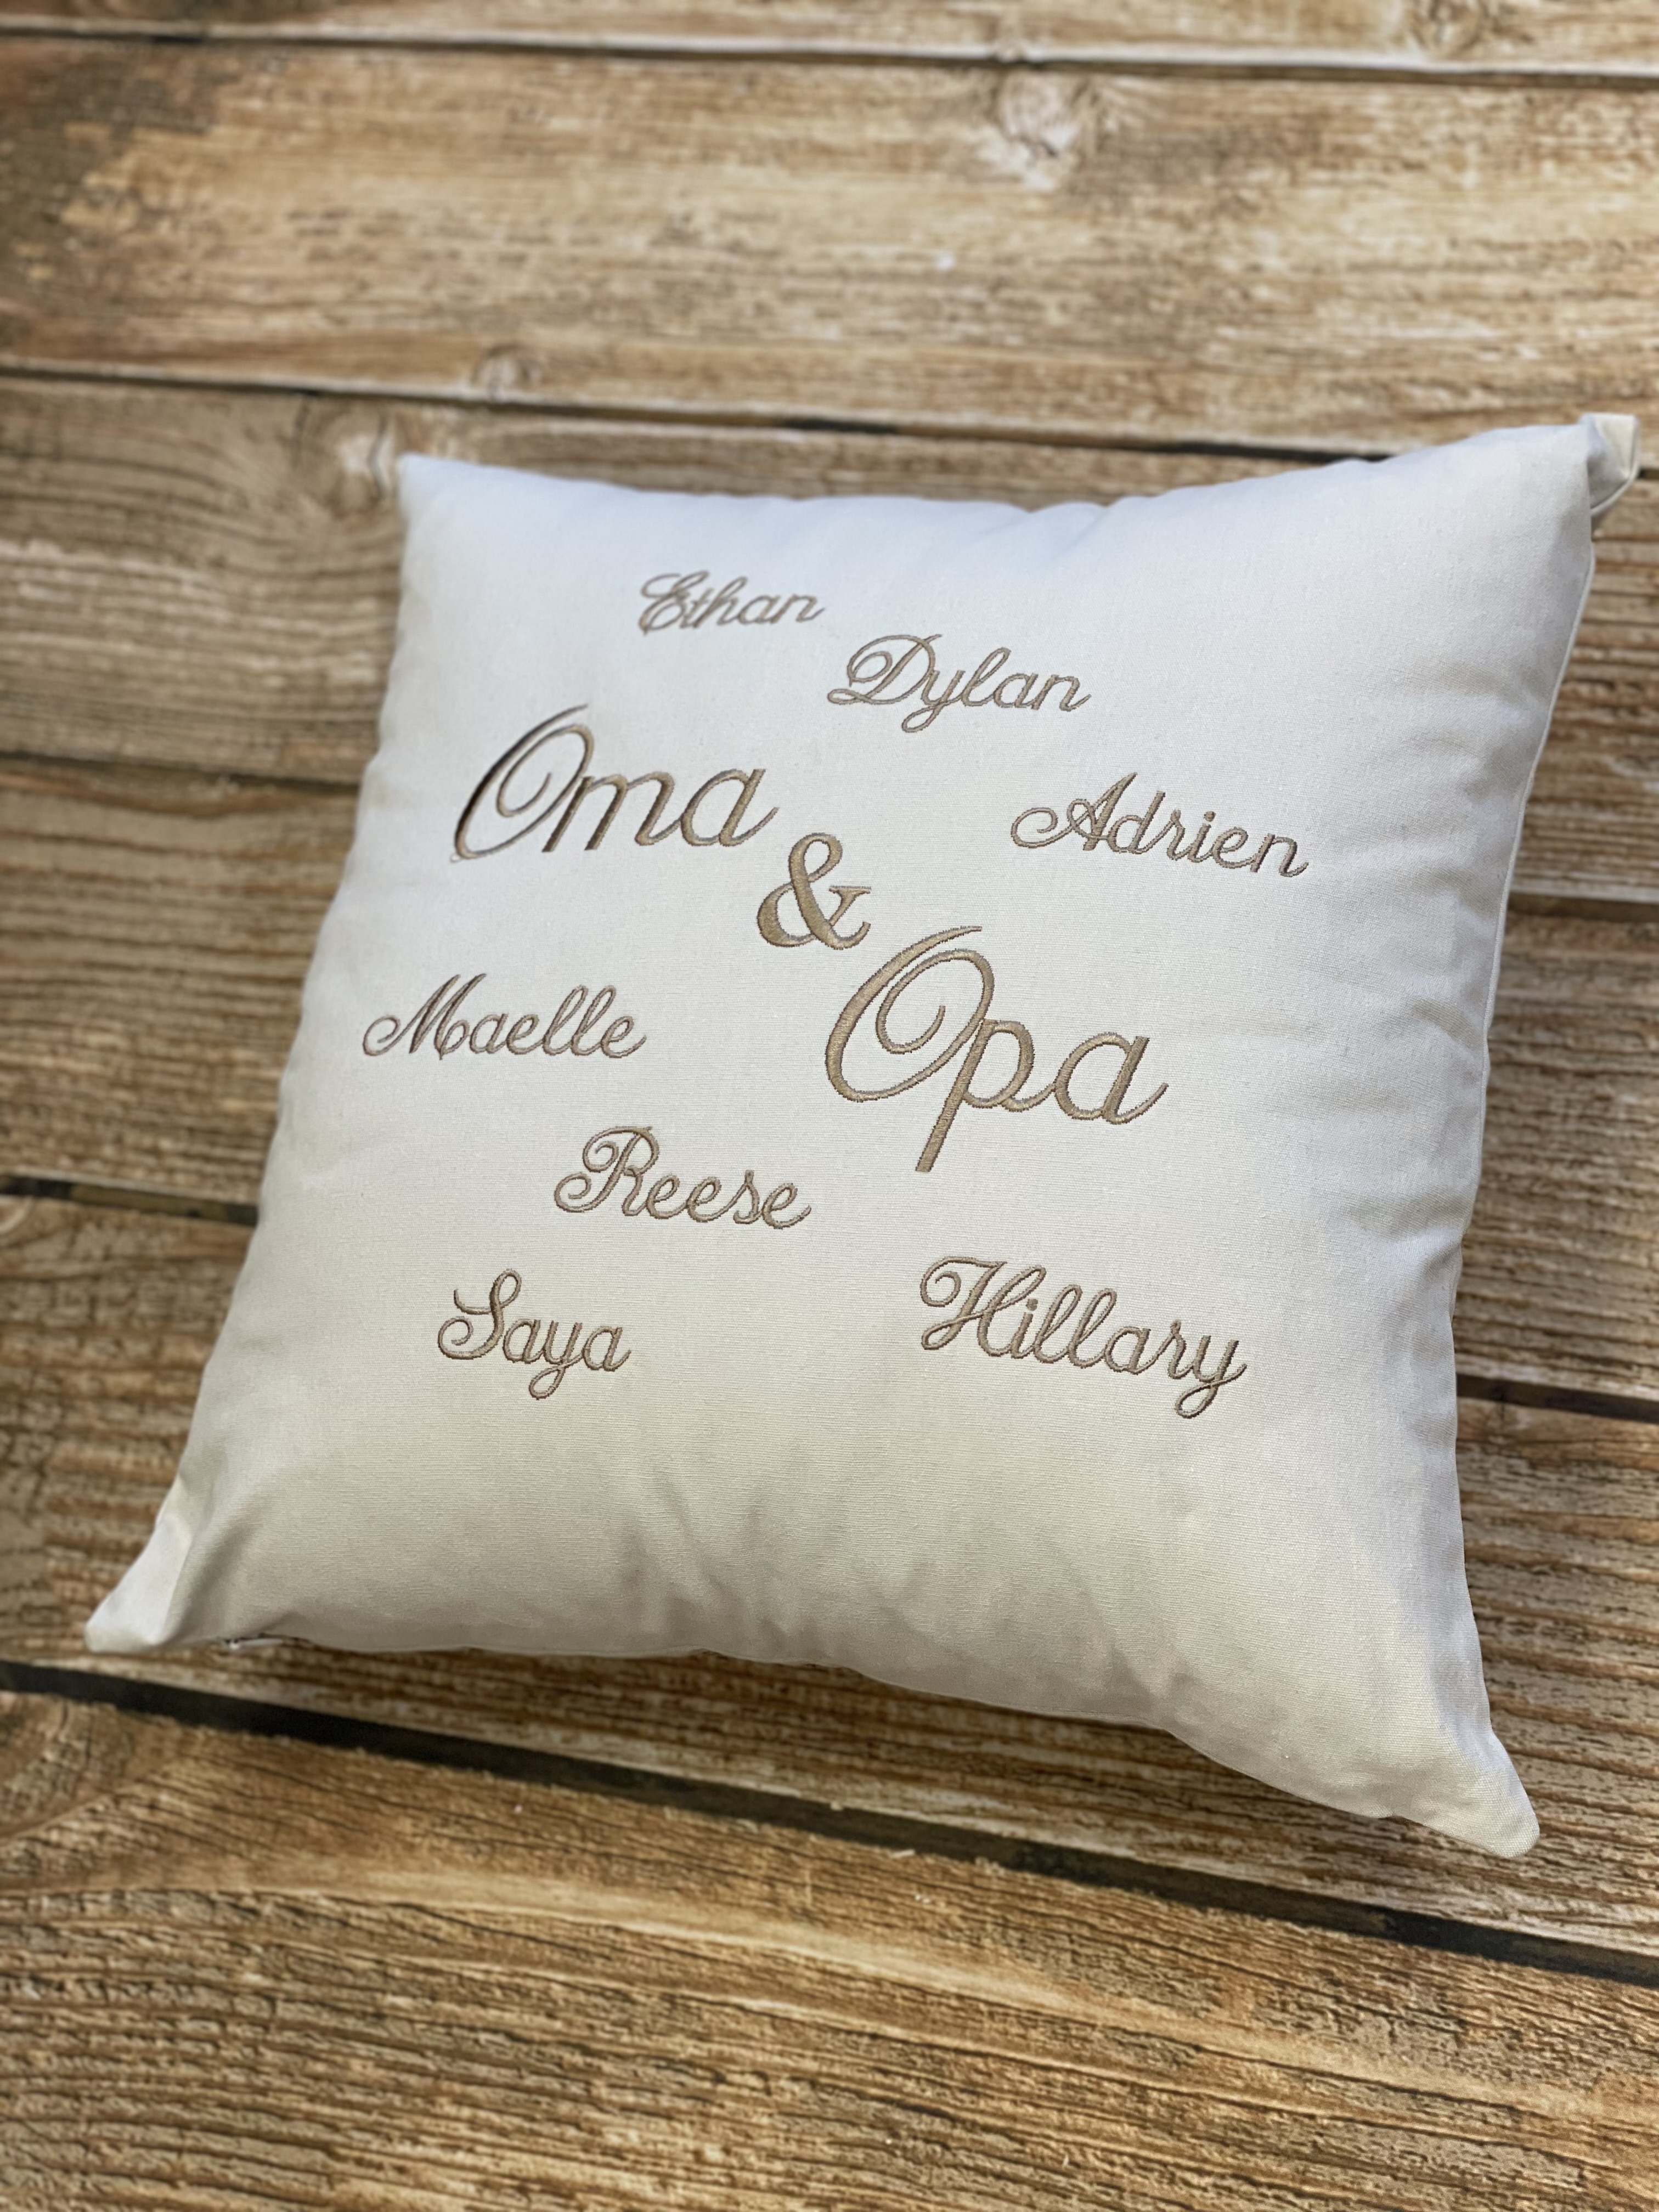 Oma and Opa work too!  Shown on taupe pillow with gold embroidery....perfect for your loved ones!  Wicked Stitches